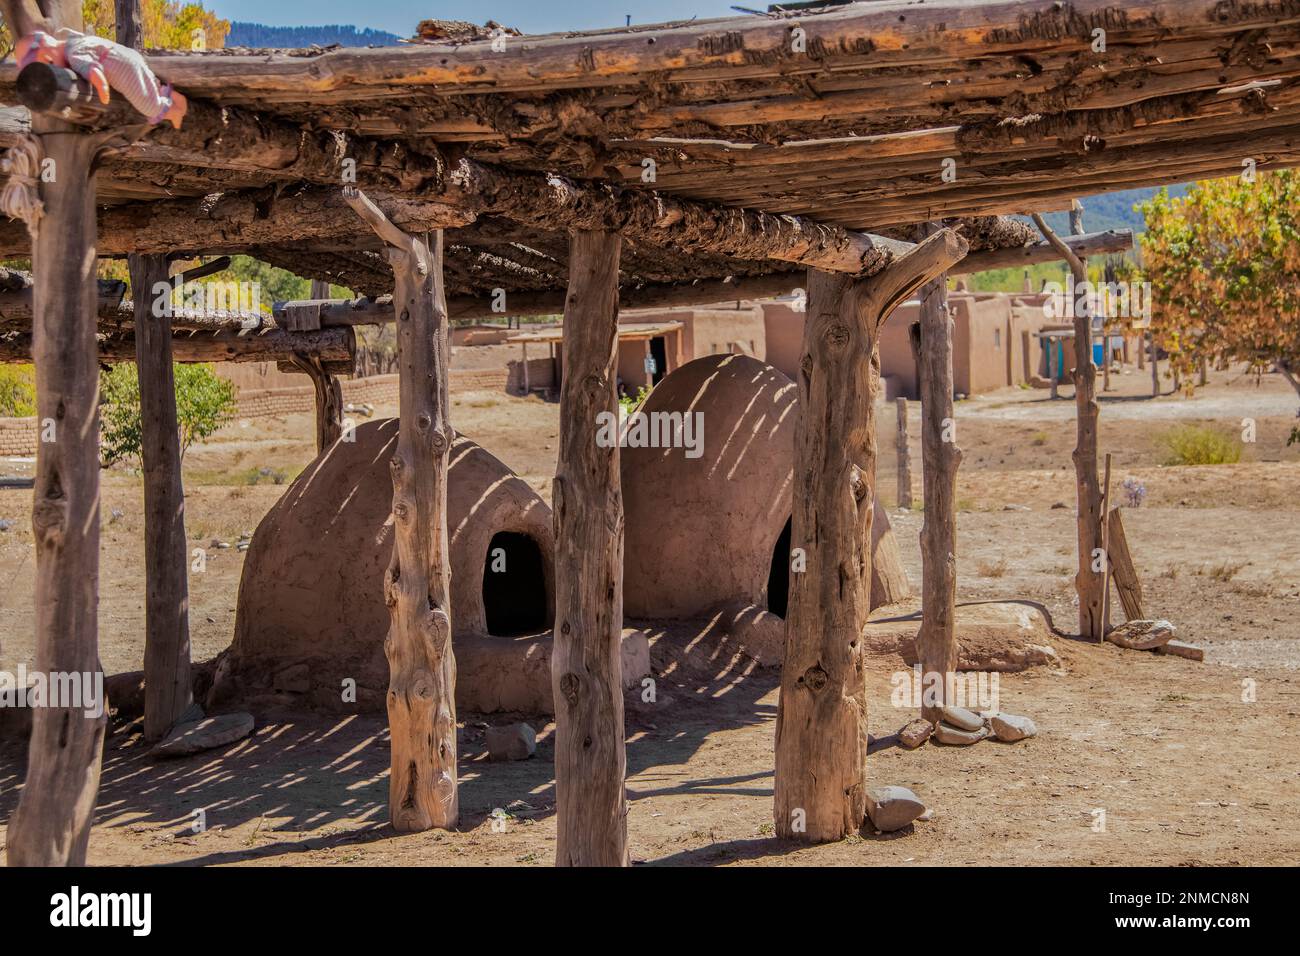 Two hornos-traditional earthen ovens- underneath a drying rack with a childs doll left on the corner - Homes of the Ute Pueblo in Taos New Mexico in t Stock Photo